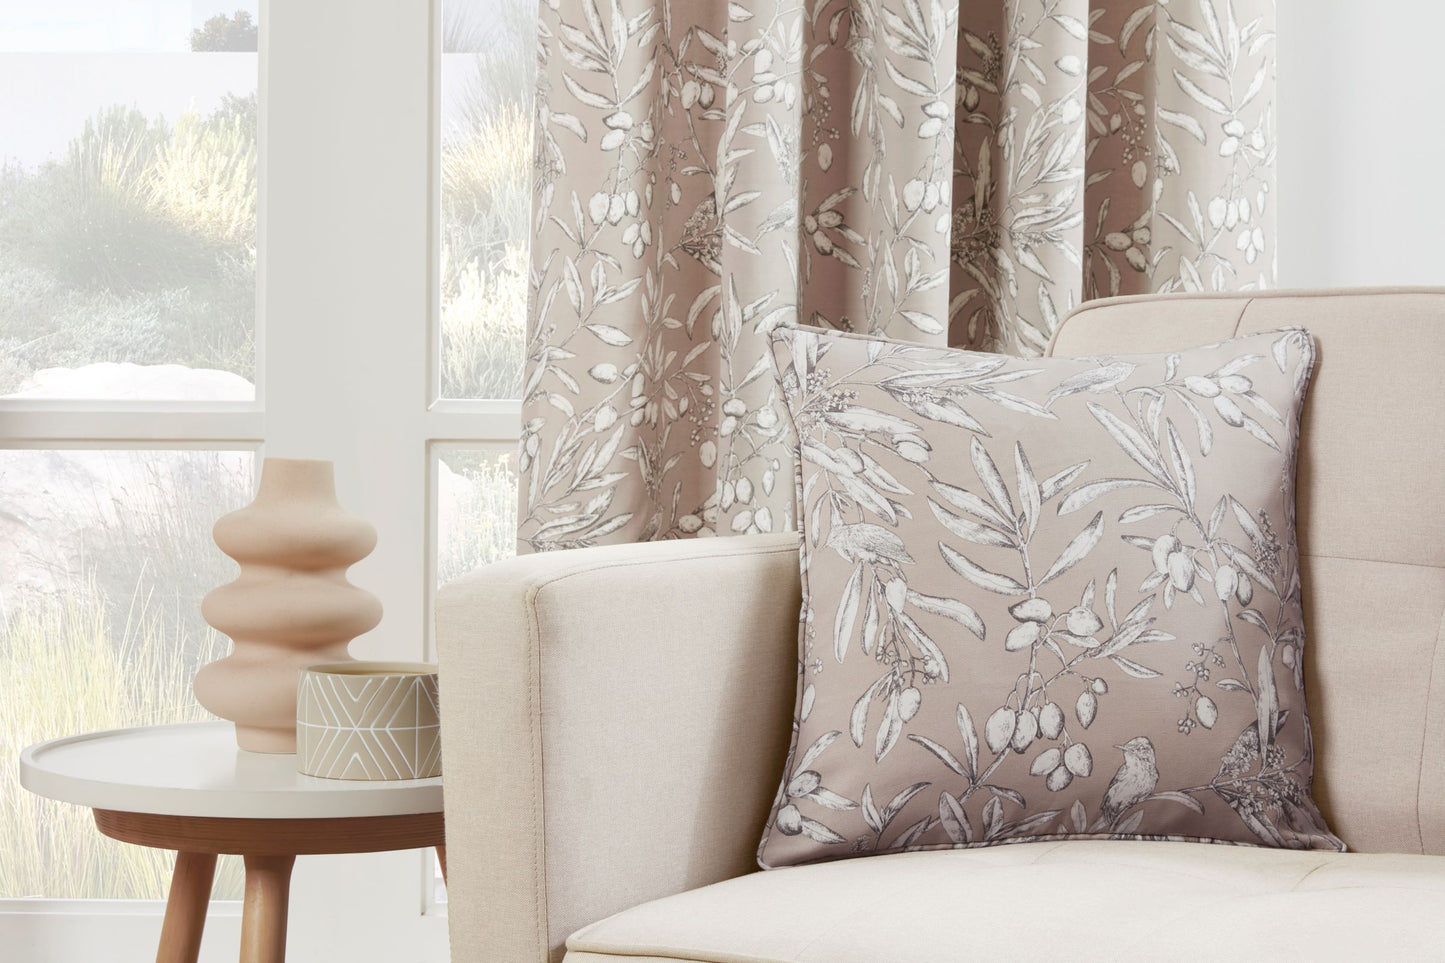 Aviary Design Pair Curtains in Taupe